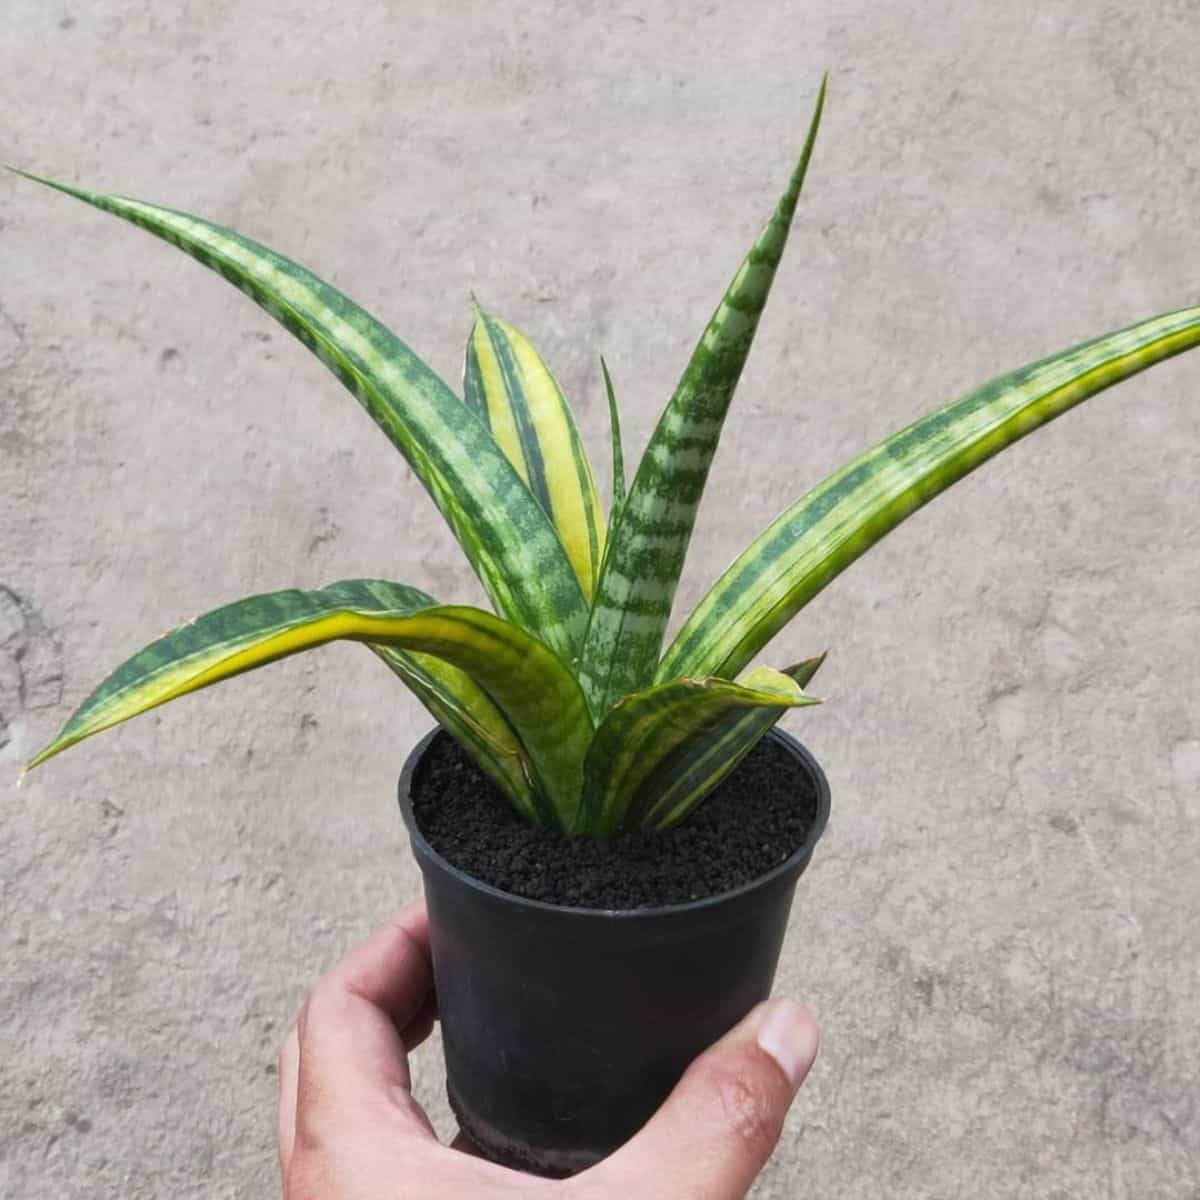 Sansevieria Ernestii grows in a black pot held by hand.